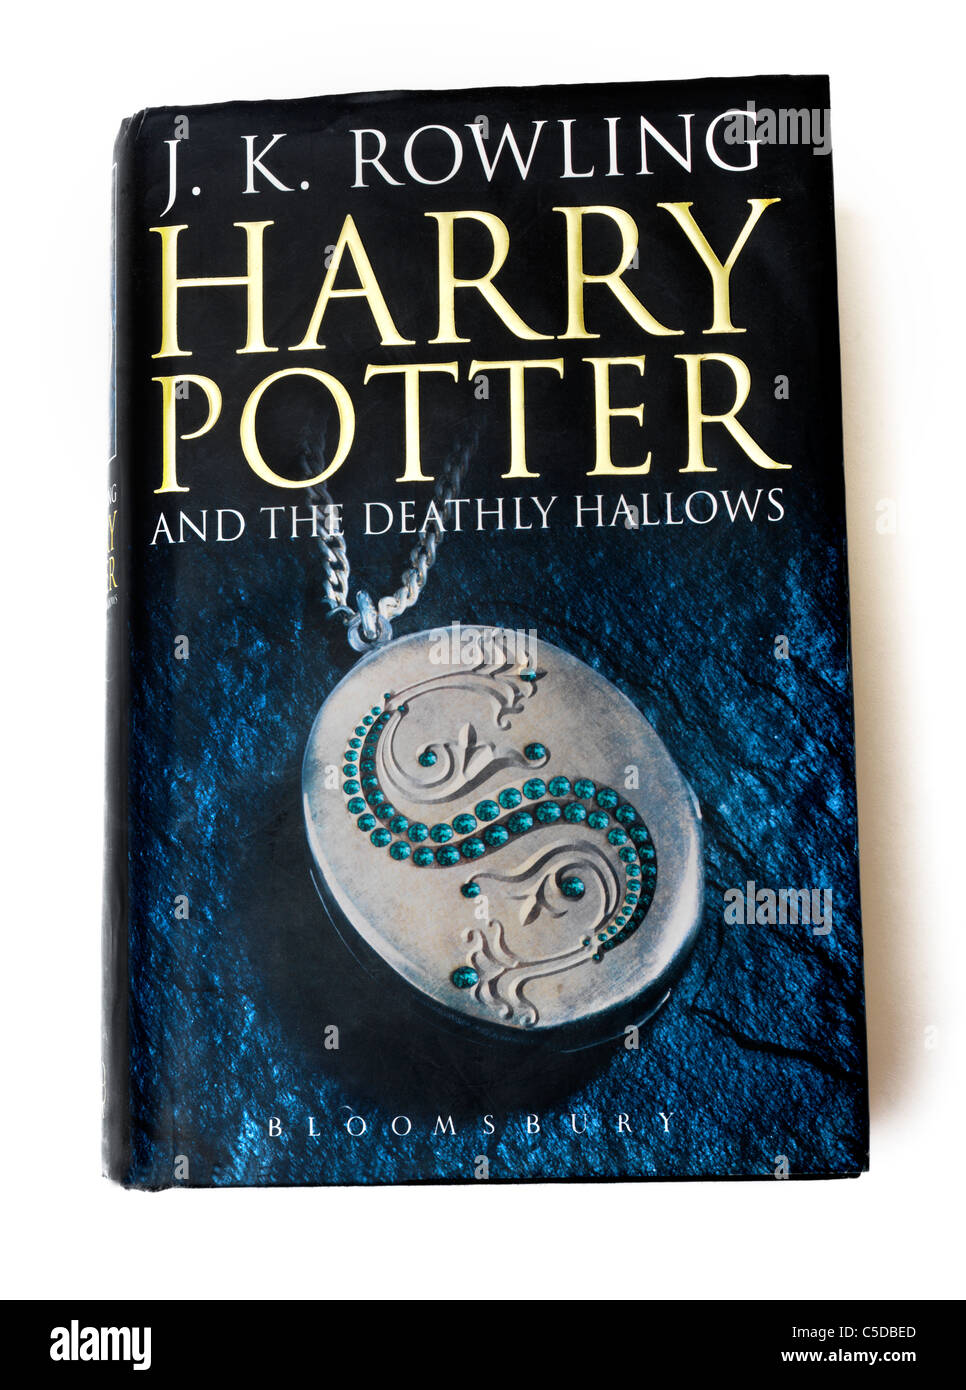 Harry Potter And The Deathly Hallows Book By J. K. Rowling Stock Photo